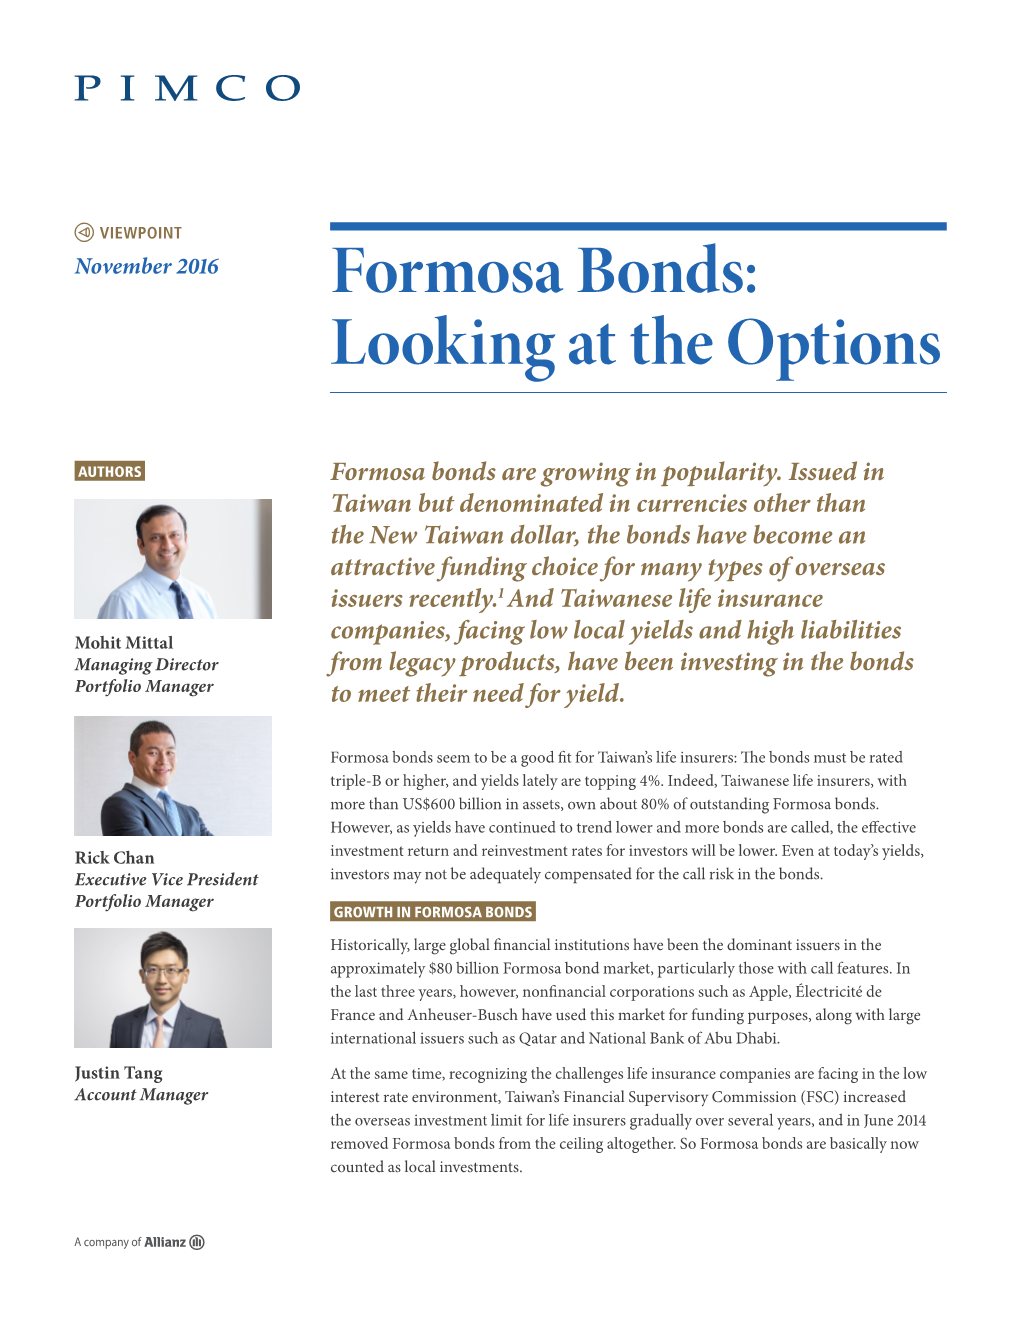 Formosa Bonds: Looking at the Options